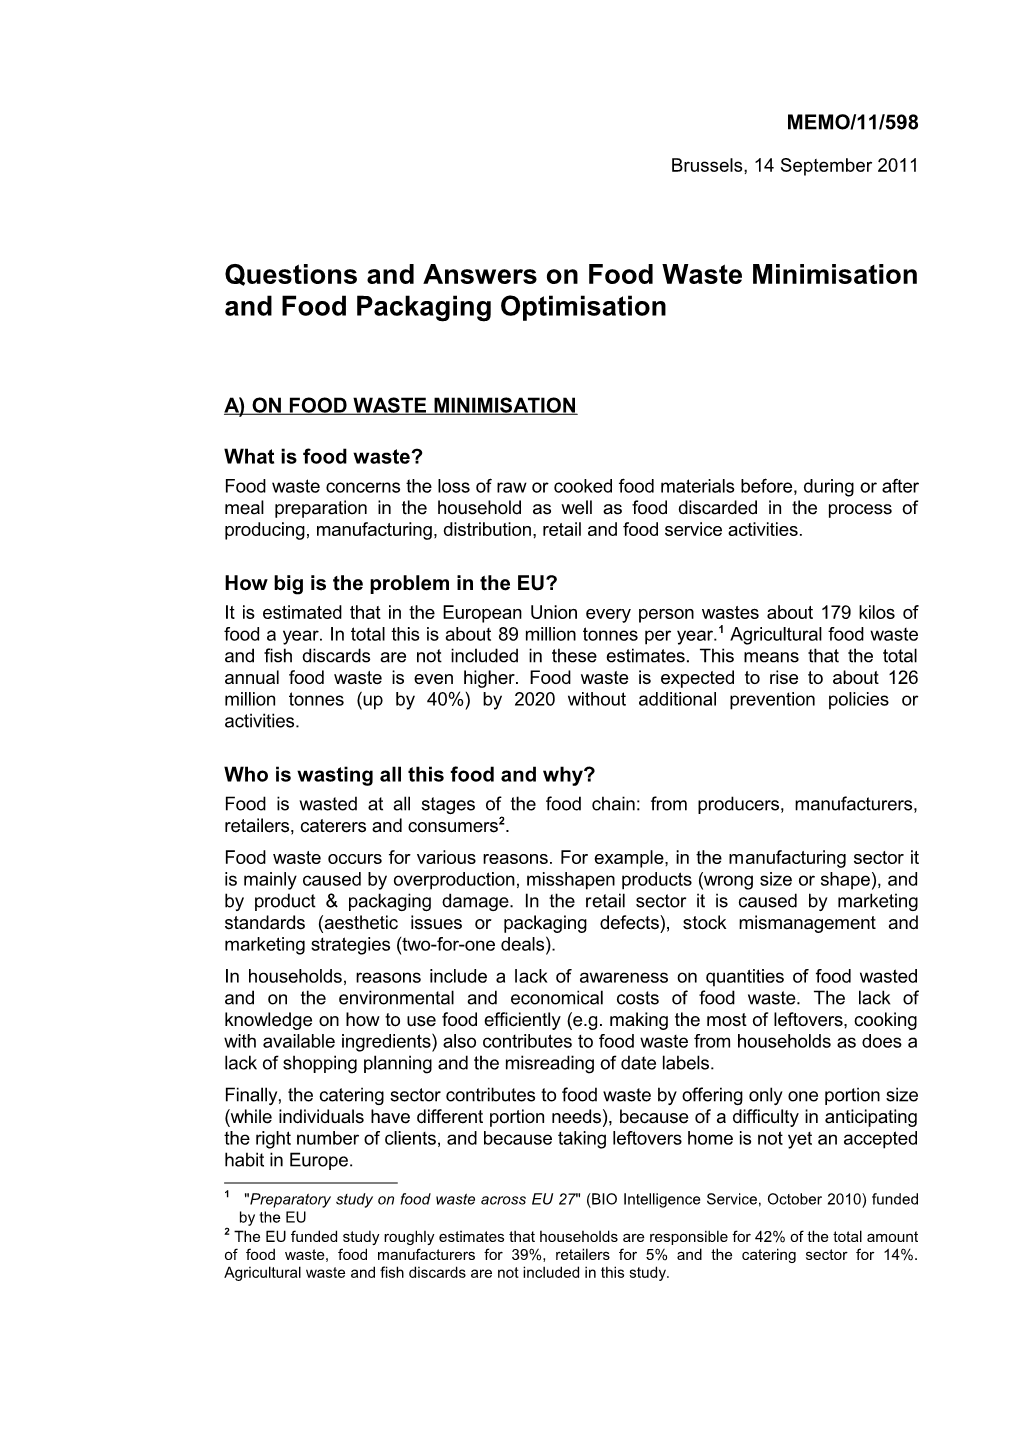 Questions and Answers on Food Waste Minimisation and Food Packaging Optimisation